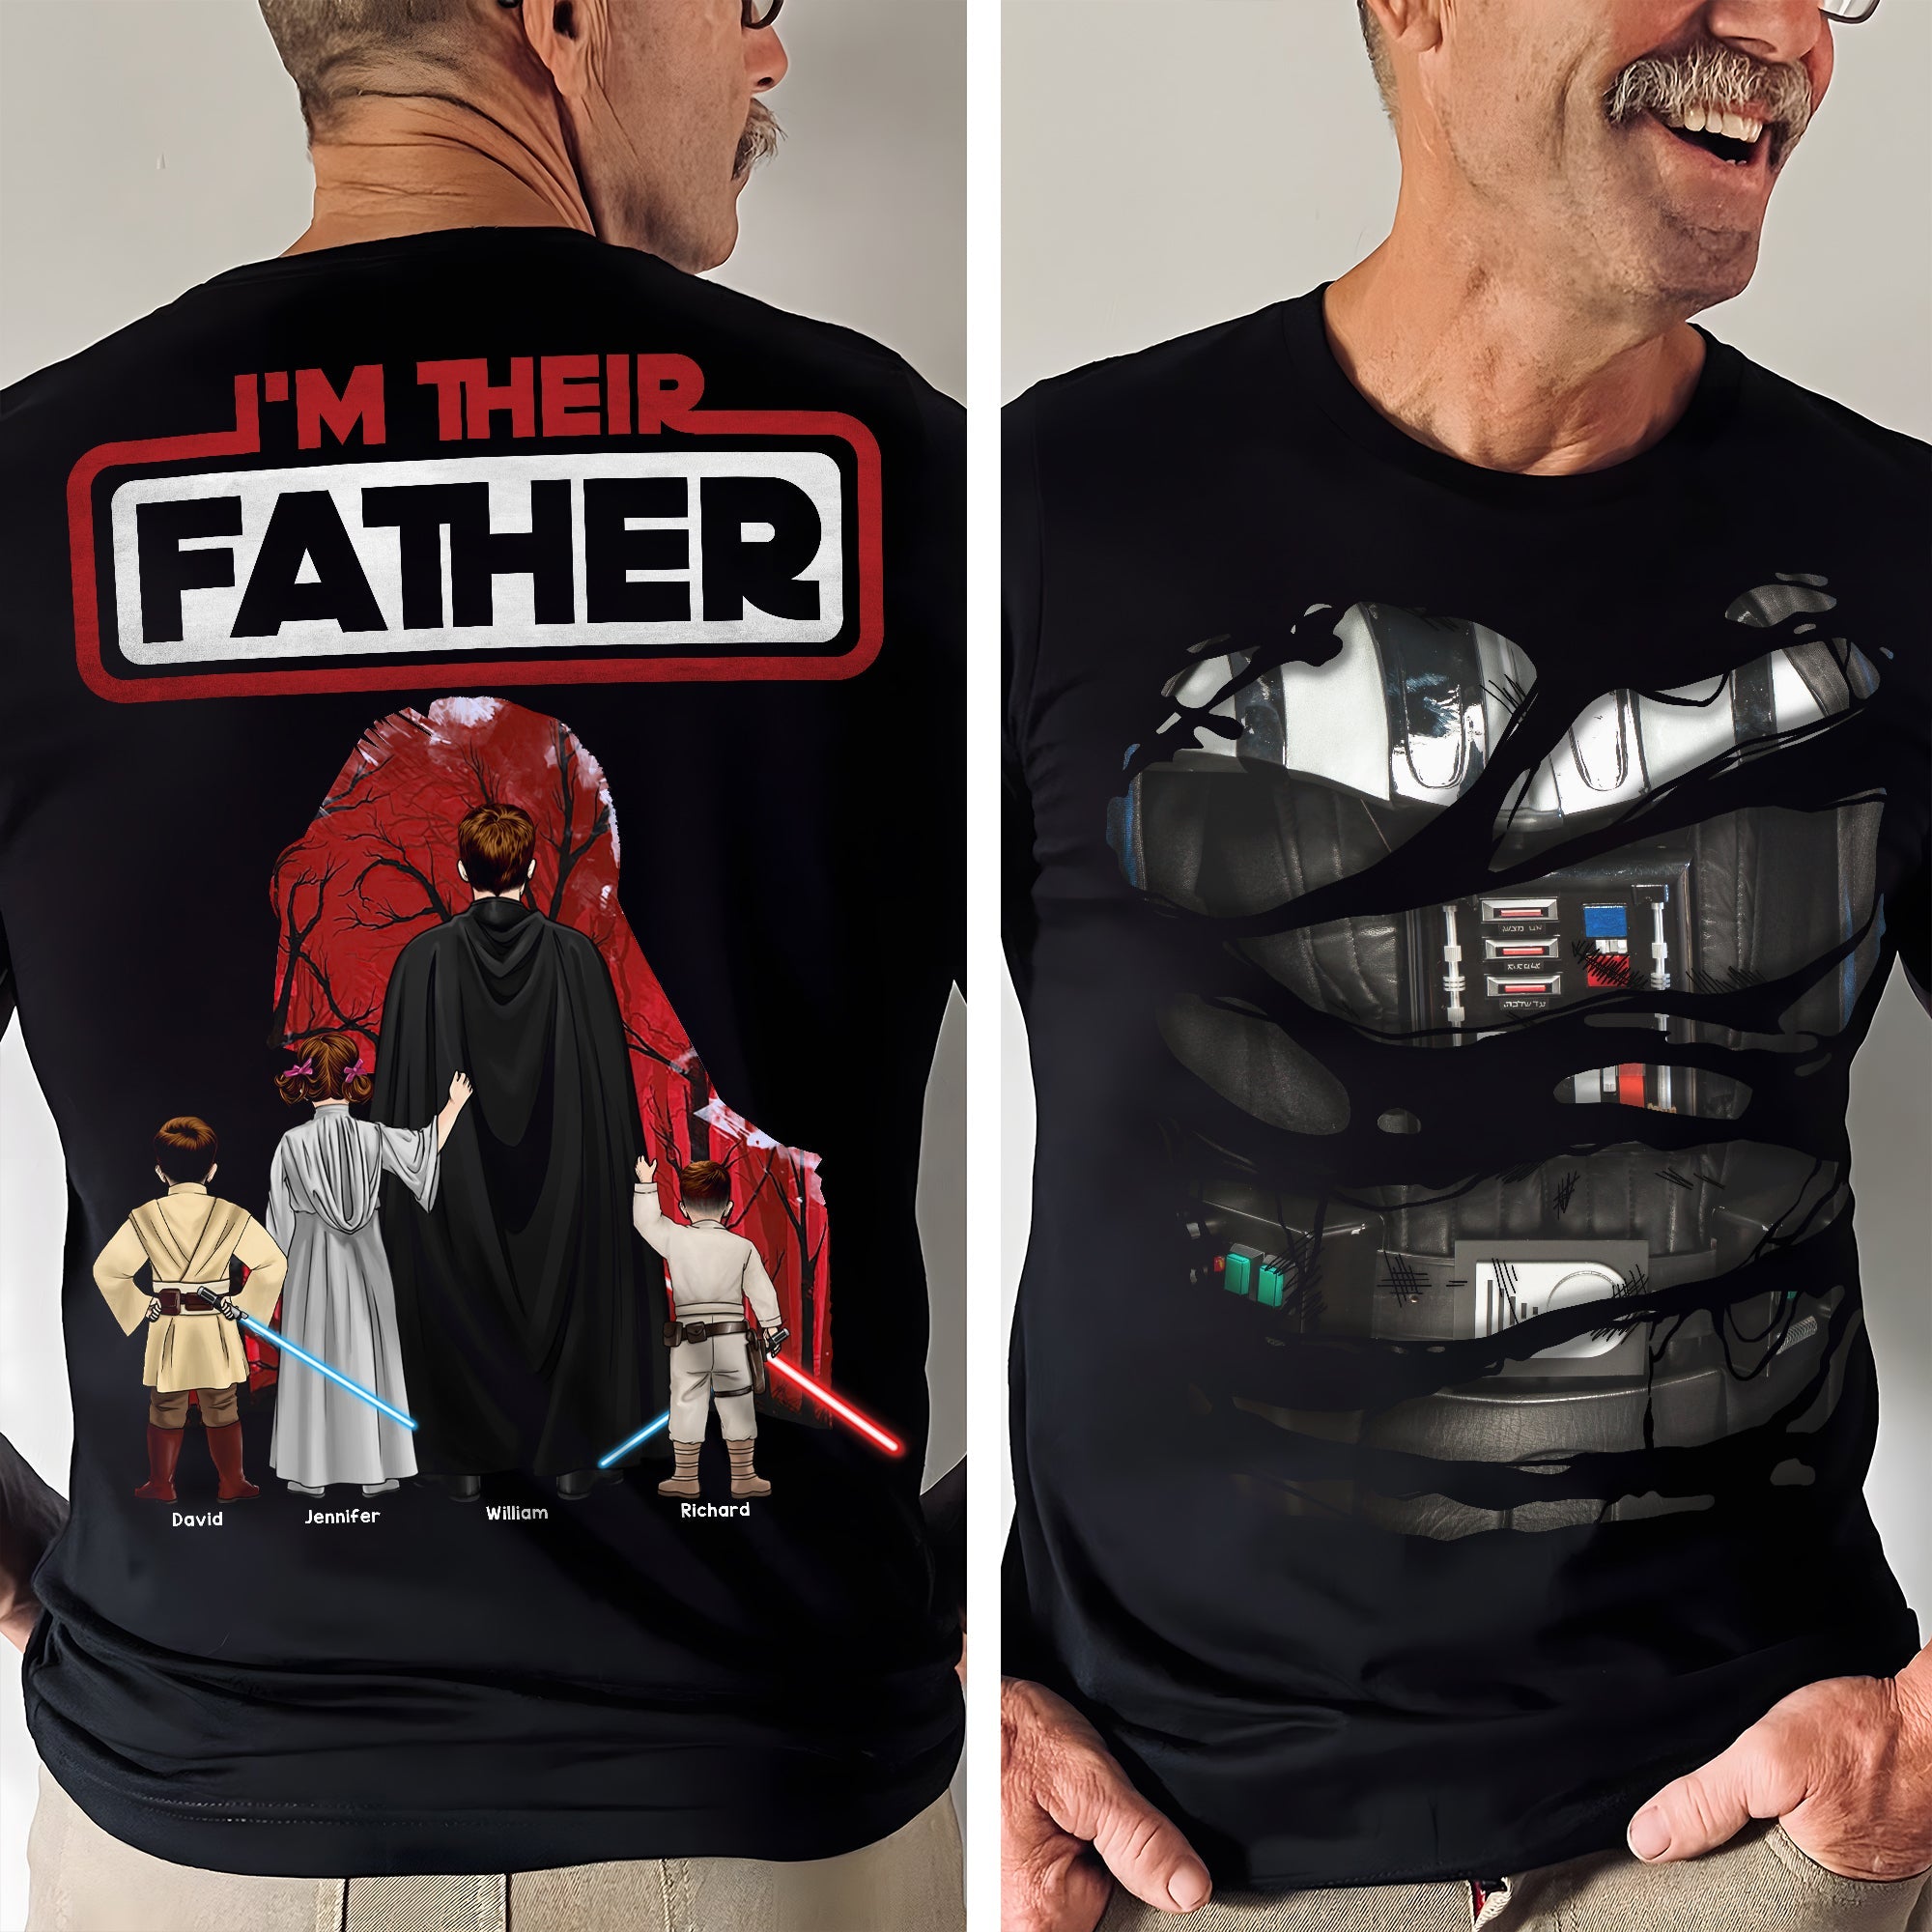 Personalized Gifts For Dad Shirt 05qhqn210524hhhg-Homacus